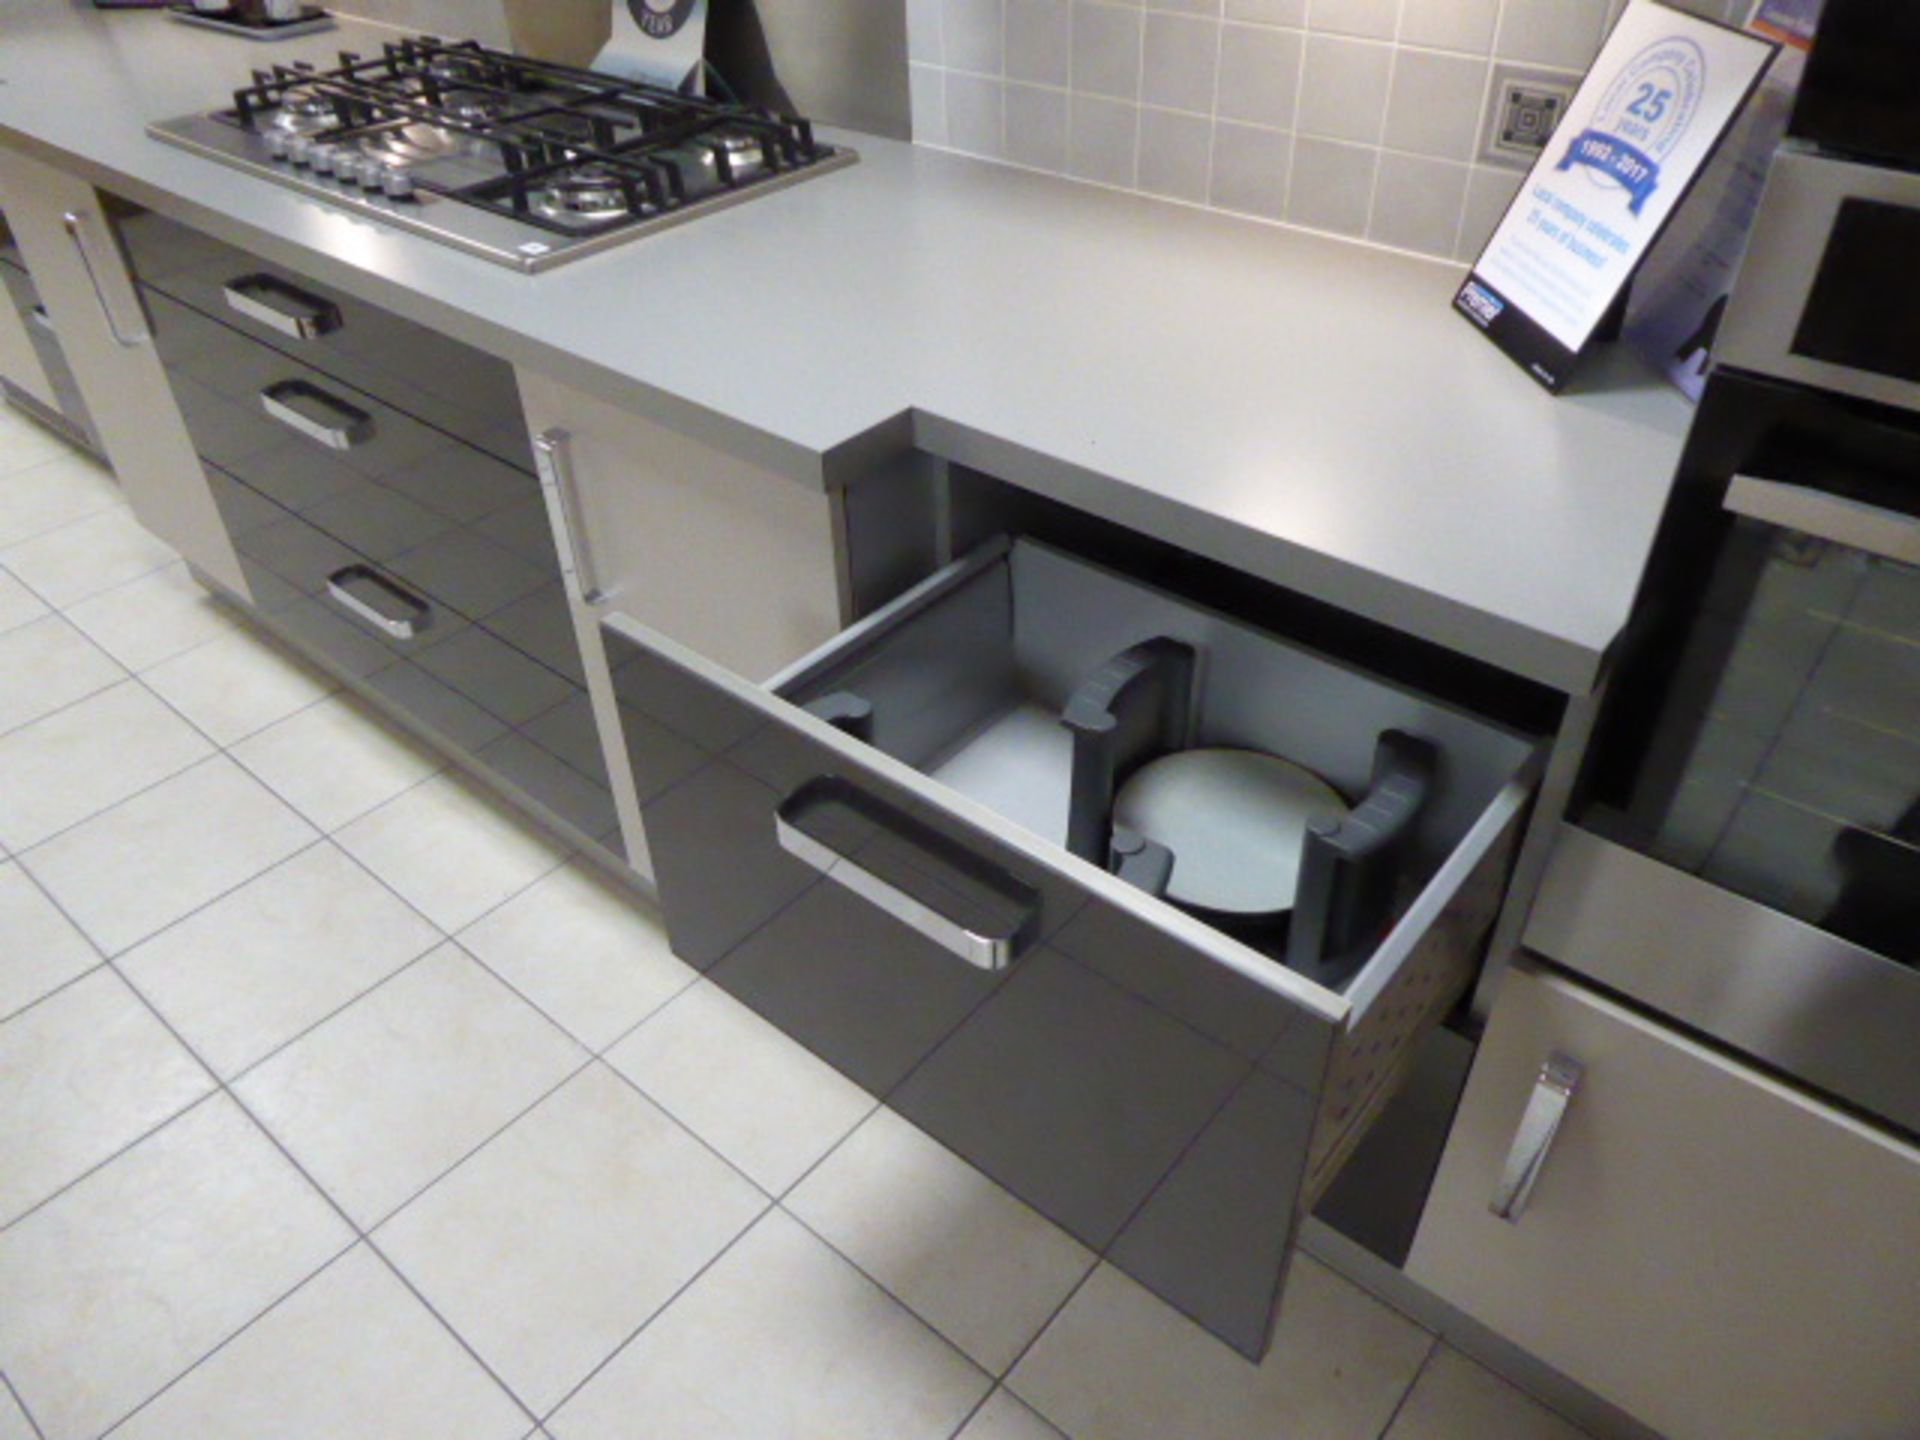 Roma Grey Metallic and Roma Grey Matte Cashmere kitchen in single galley run with a brushed - Bild 10 aus 14